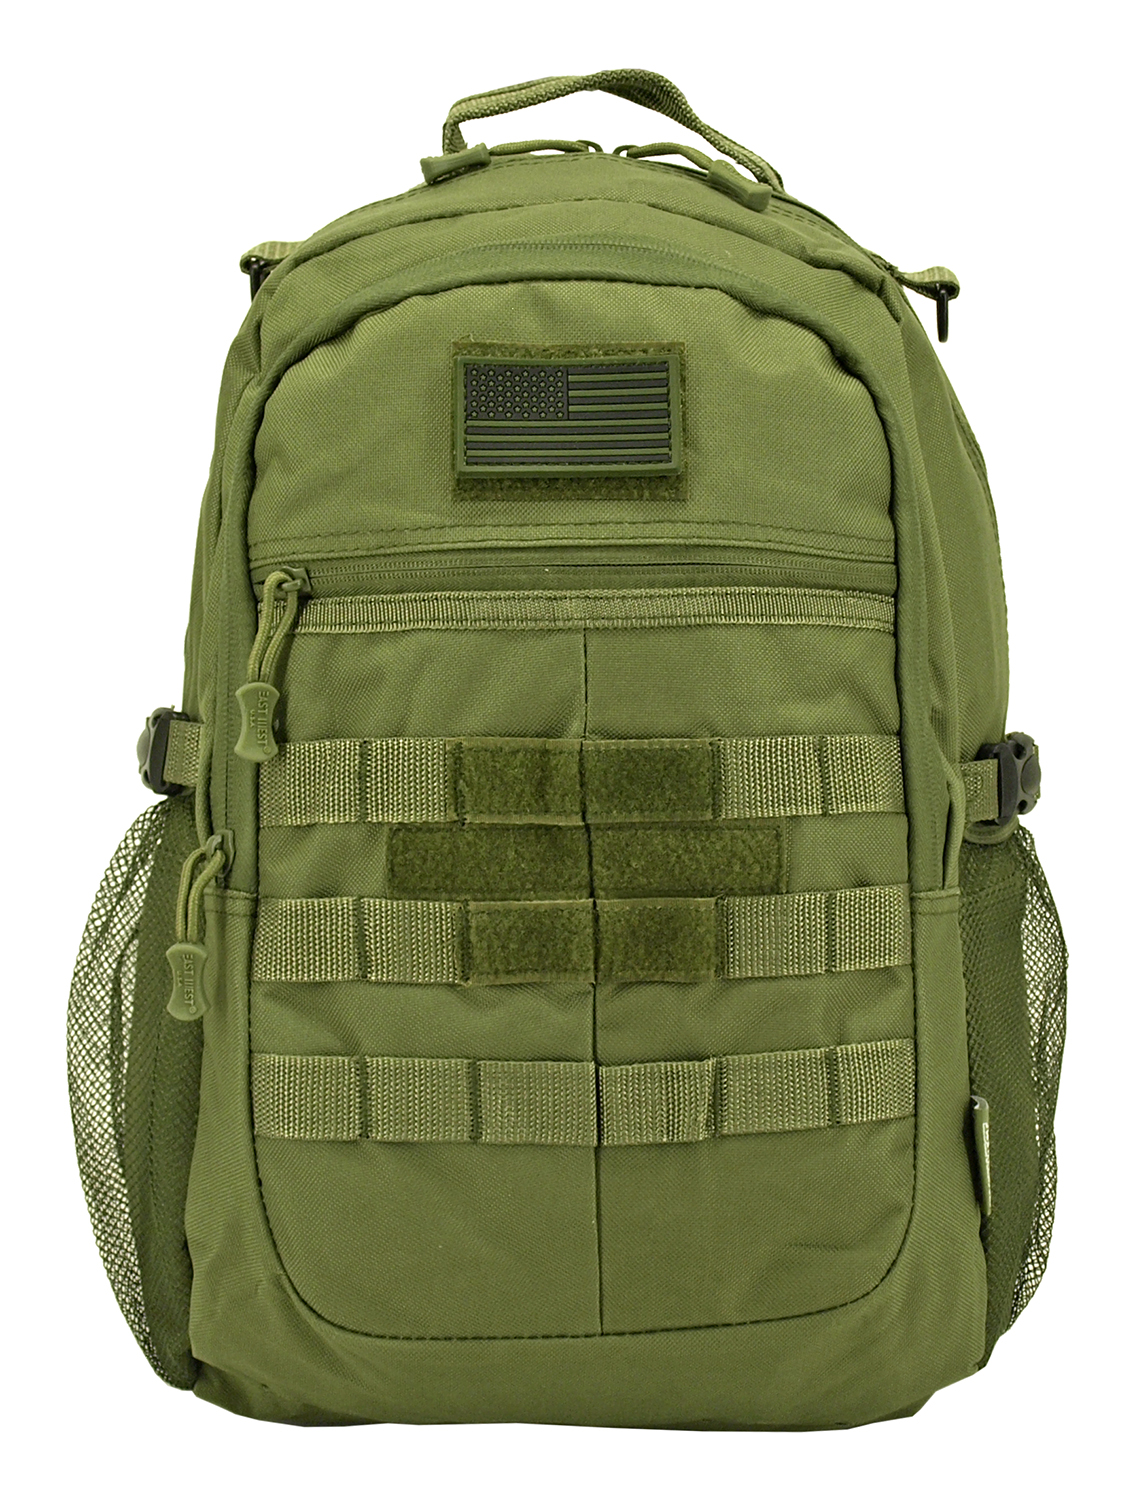 The Tactical Tradition Backpack - Olive Green